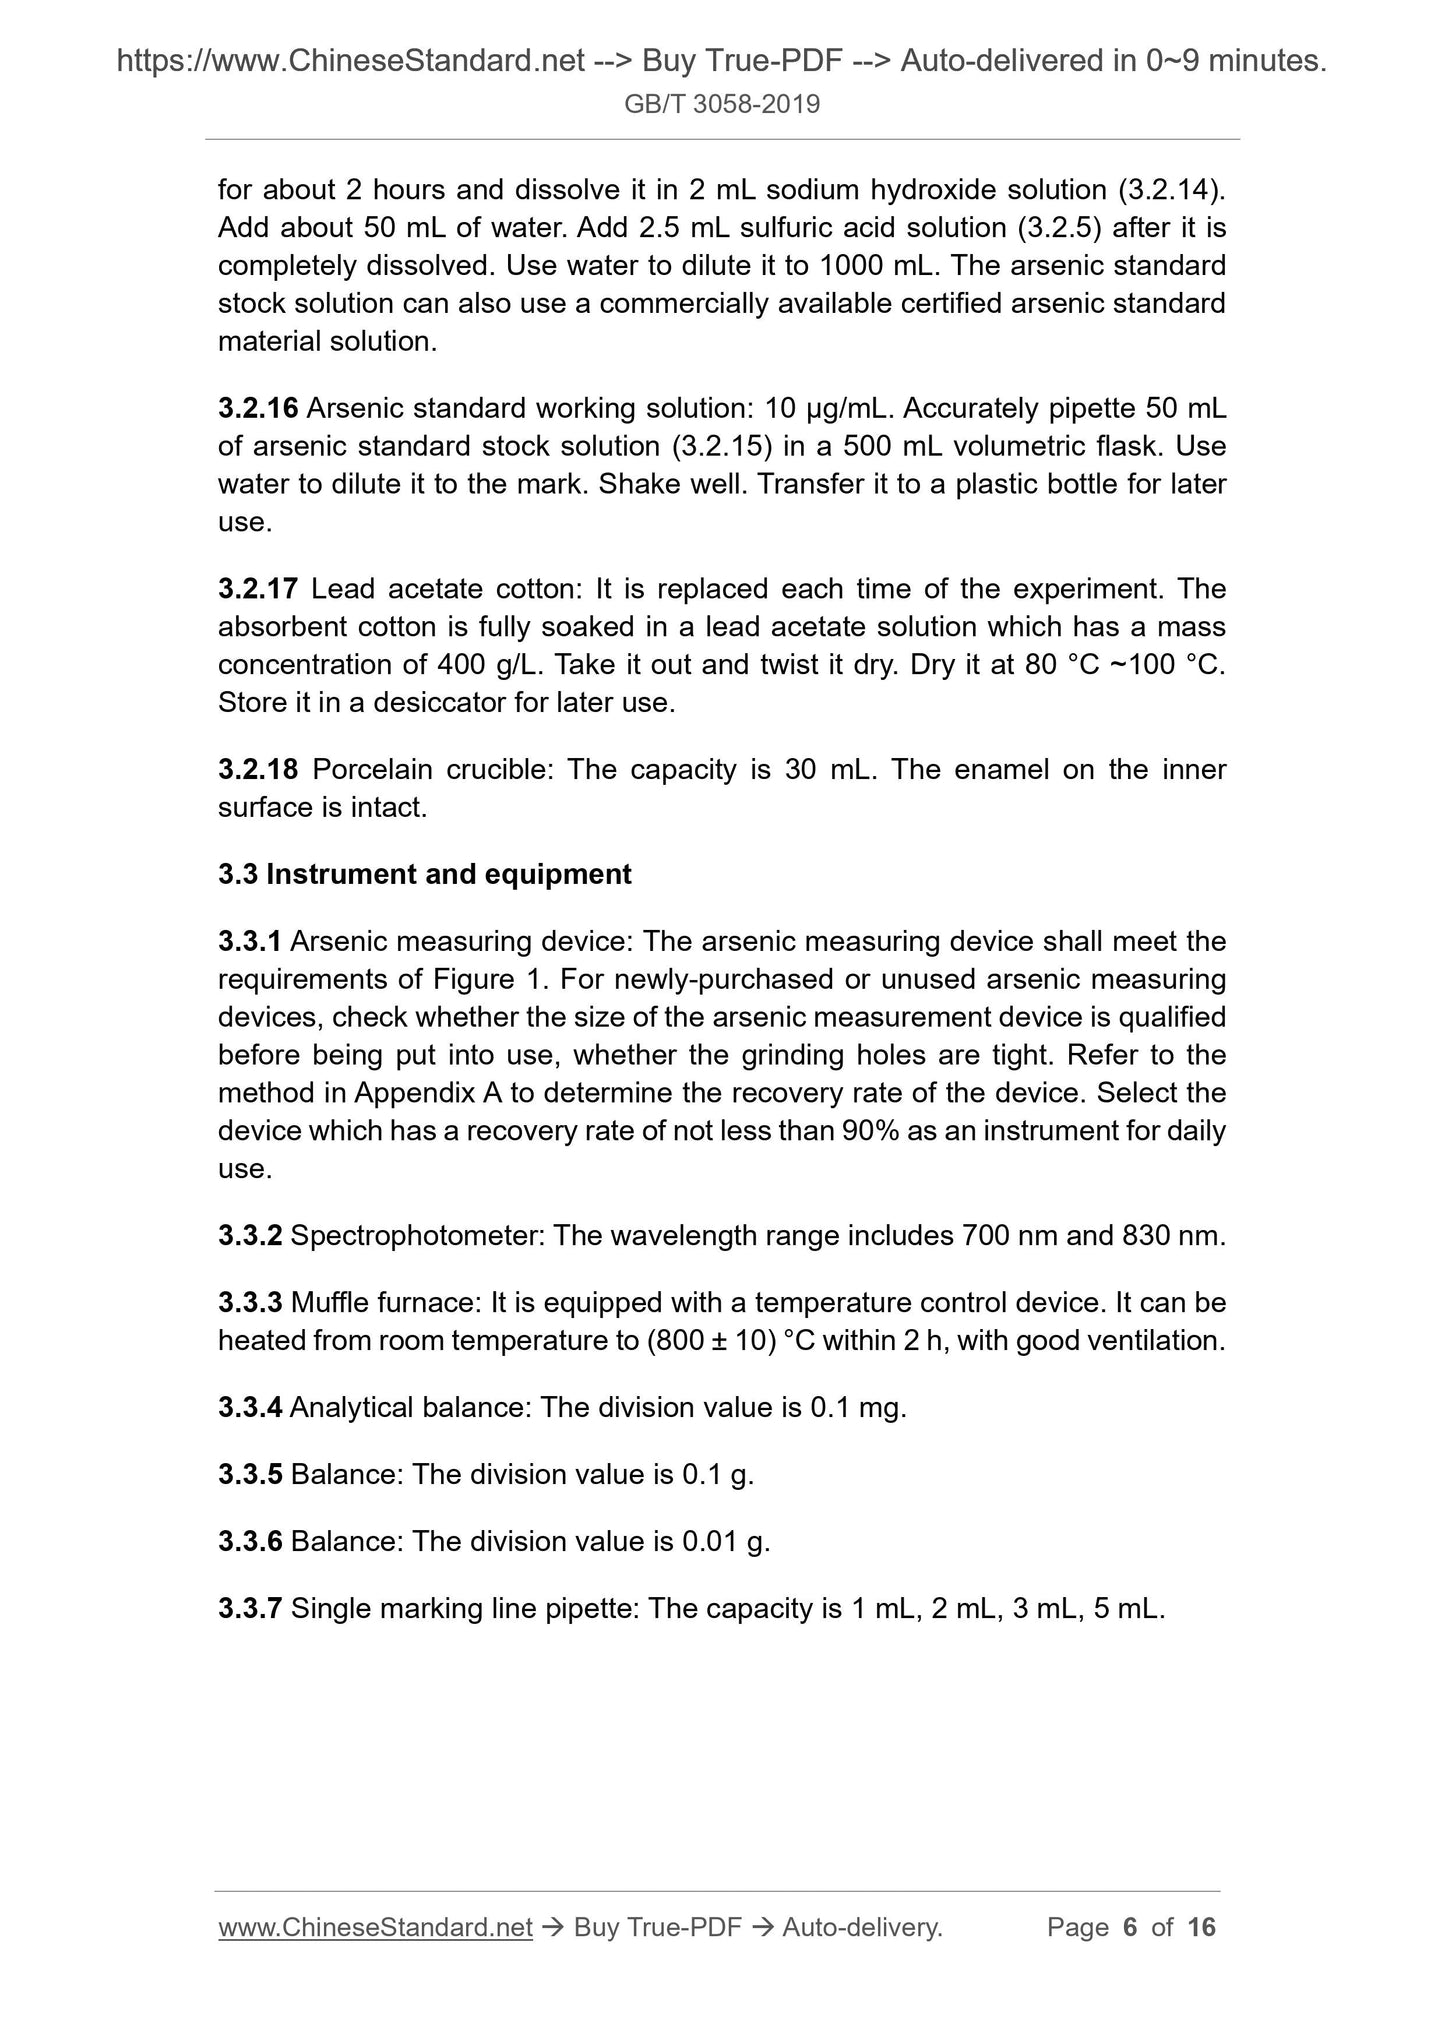 GB/T 3058-2019 Page 4